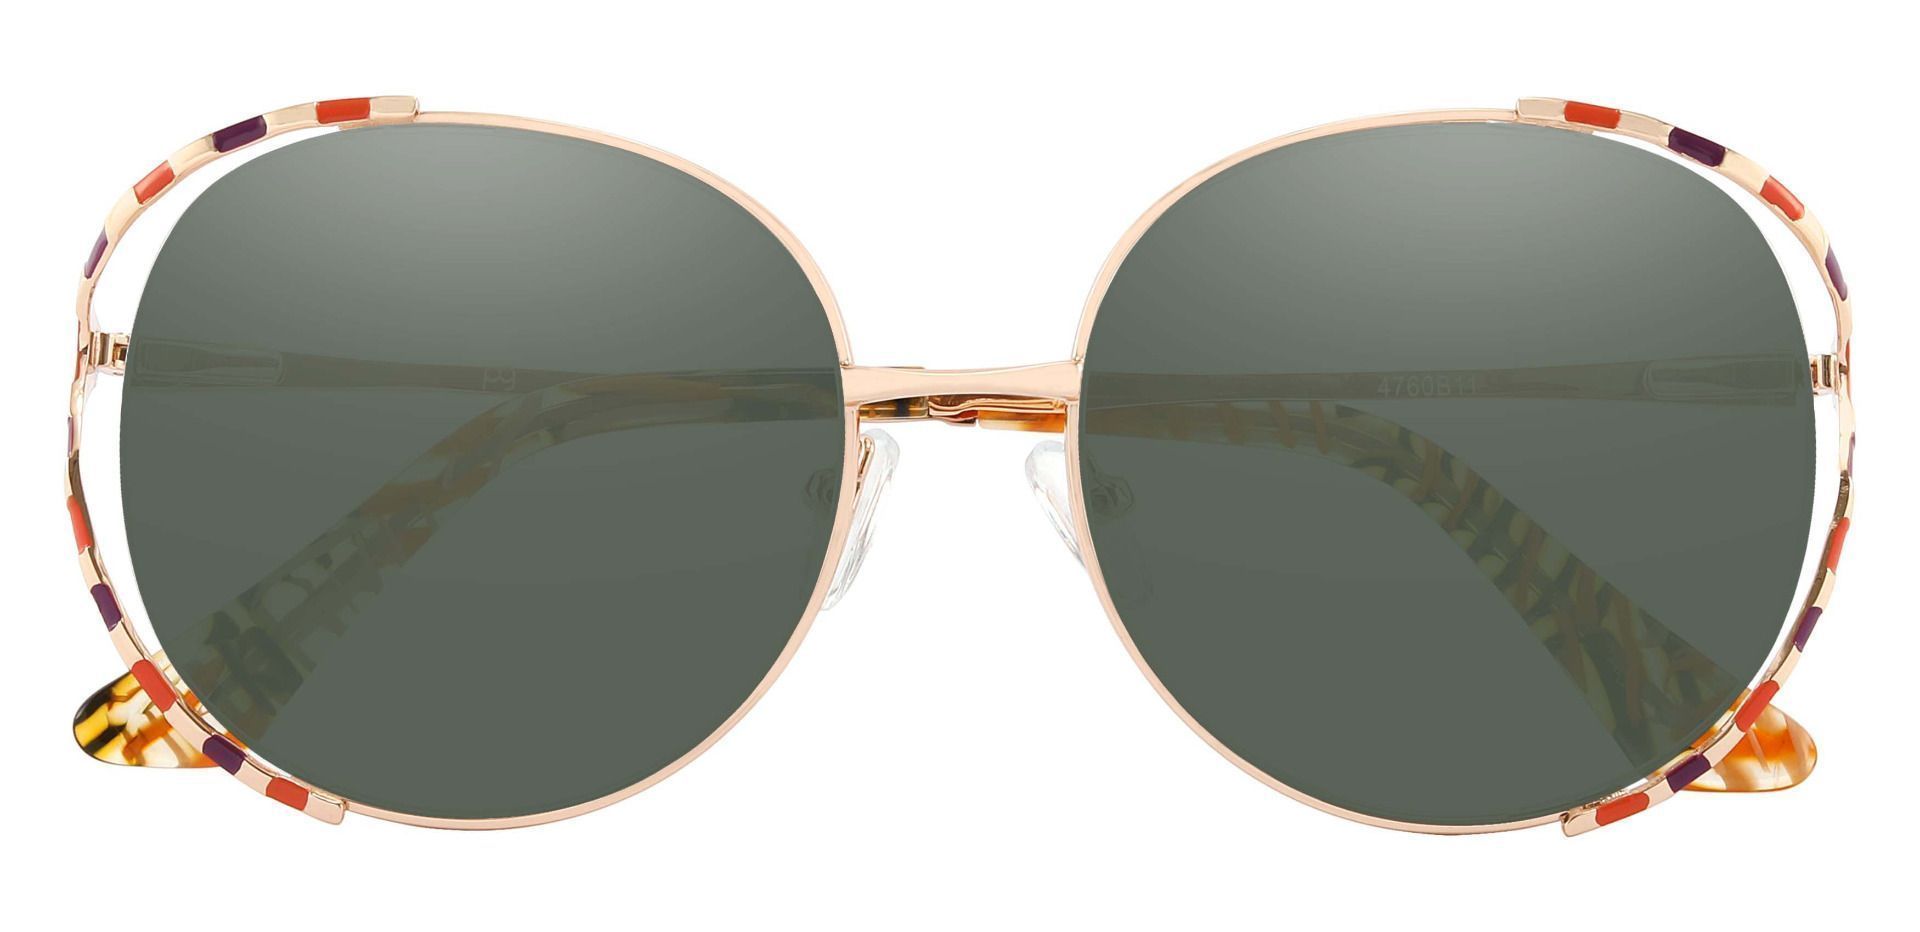 Dorothy Oval Non-Rx Sunglasses - Brown Frame With Green Lenses